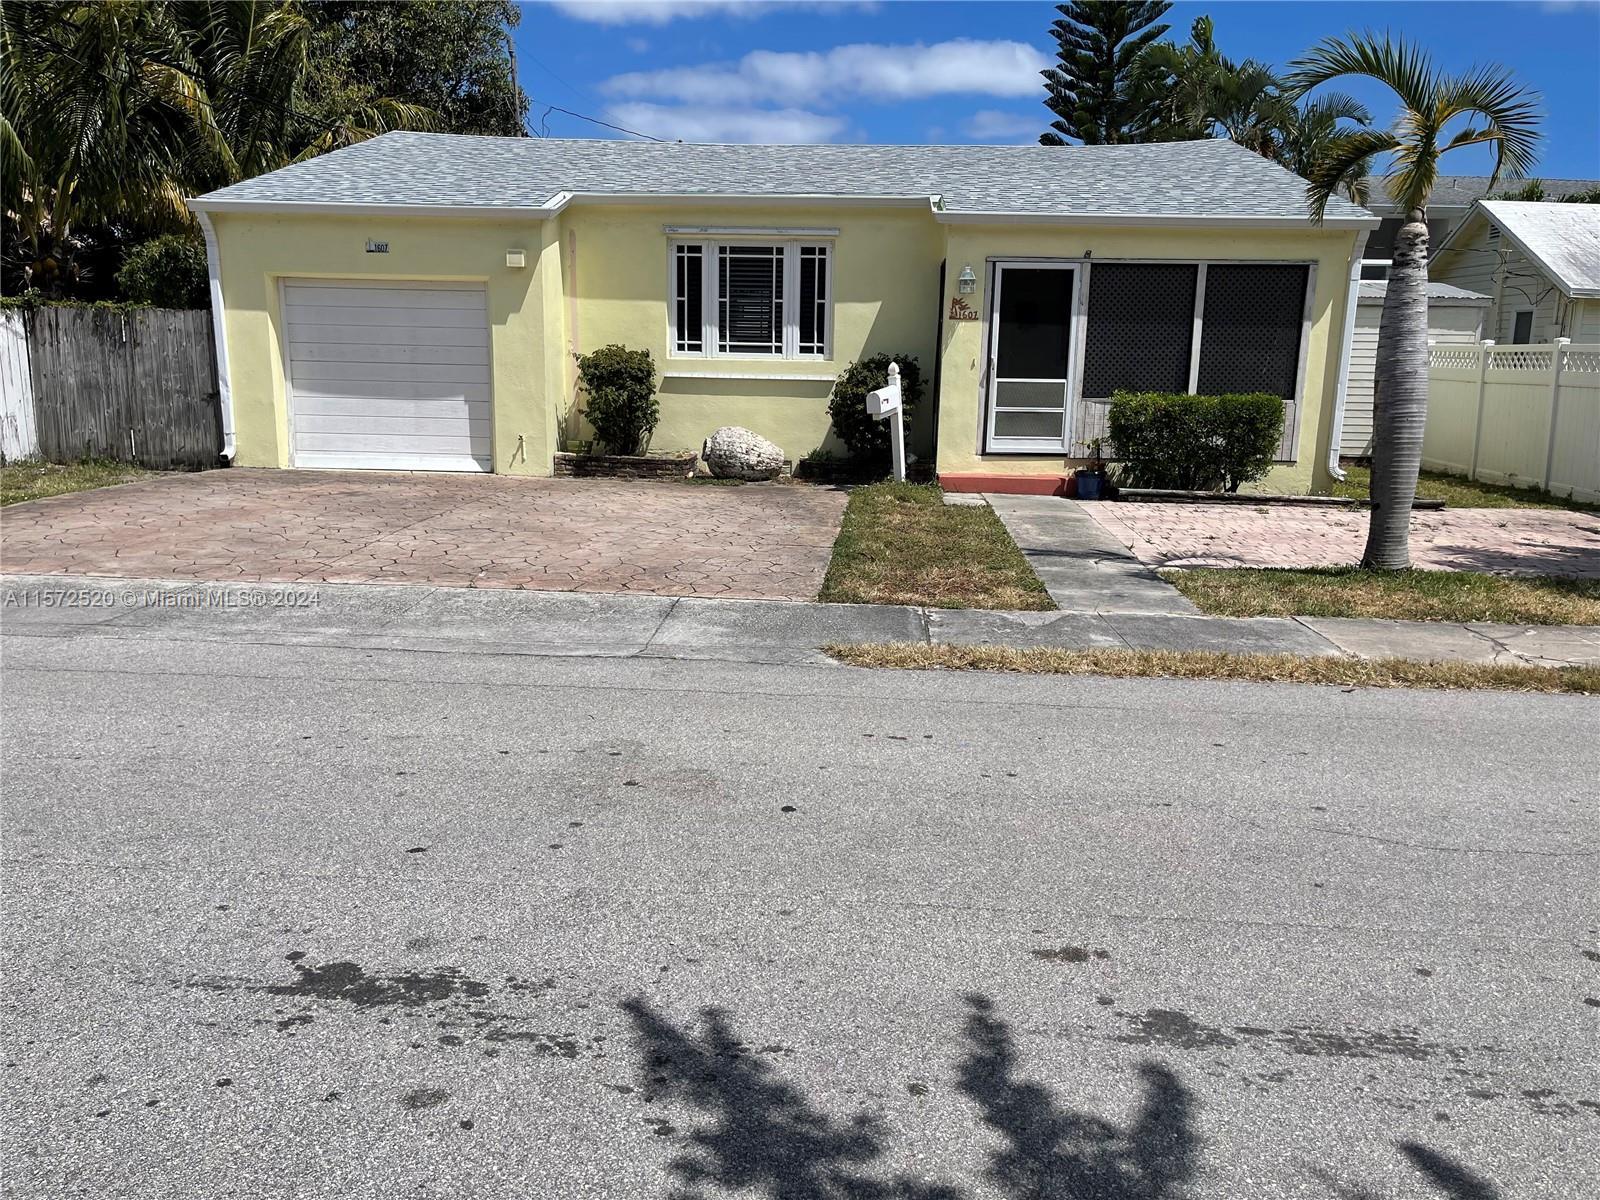 Photo of 1607 Hayes St in Hollywood, FL